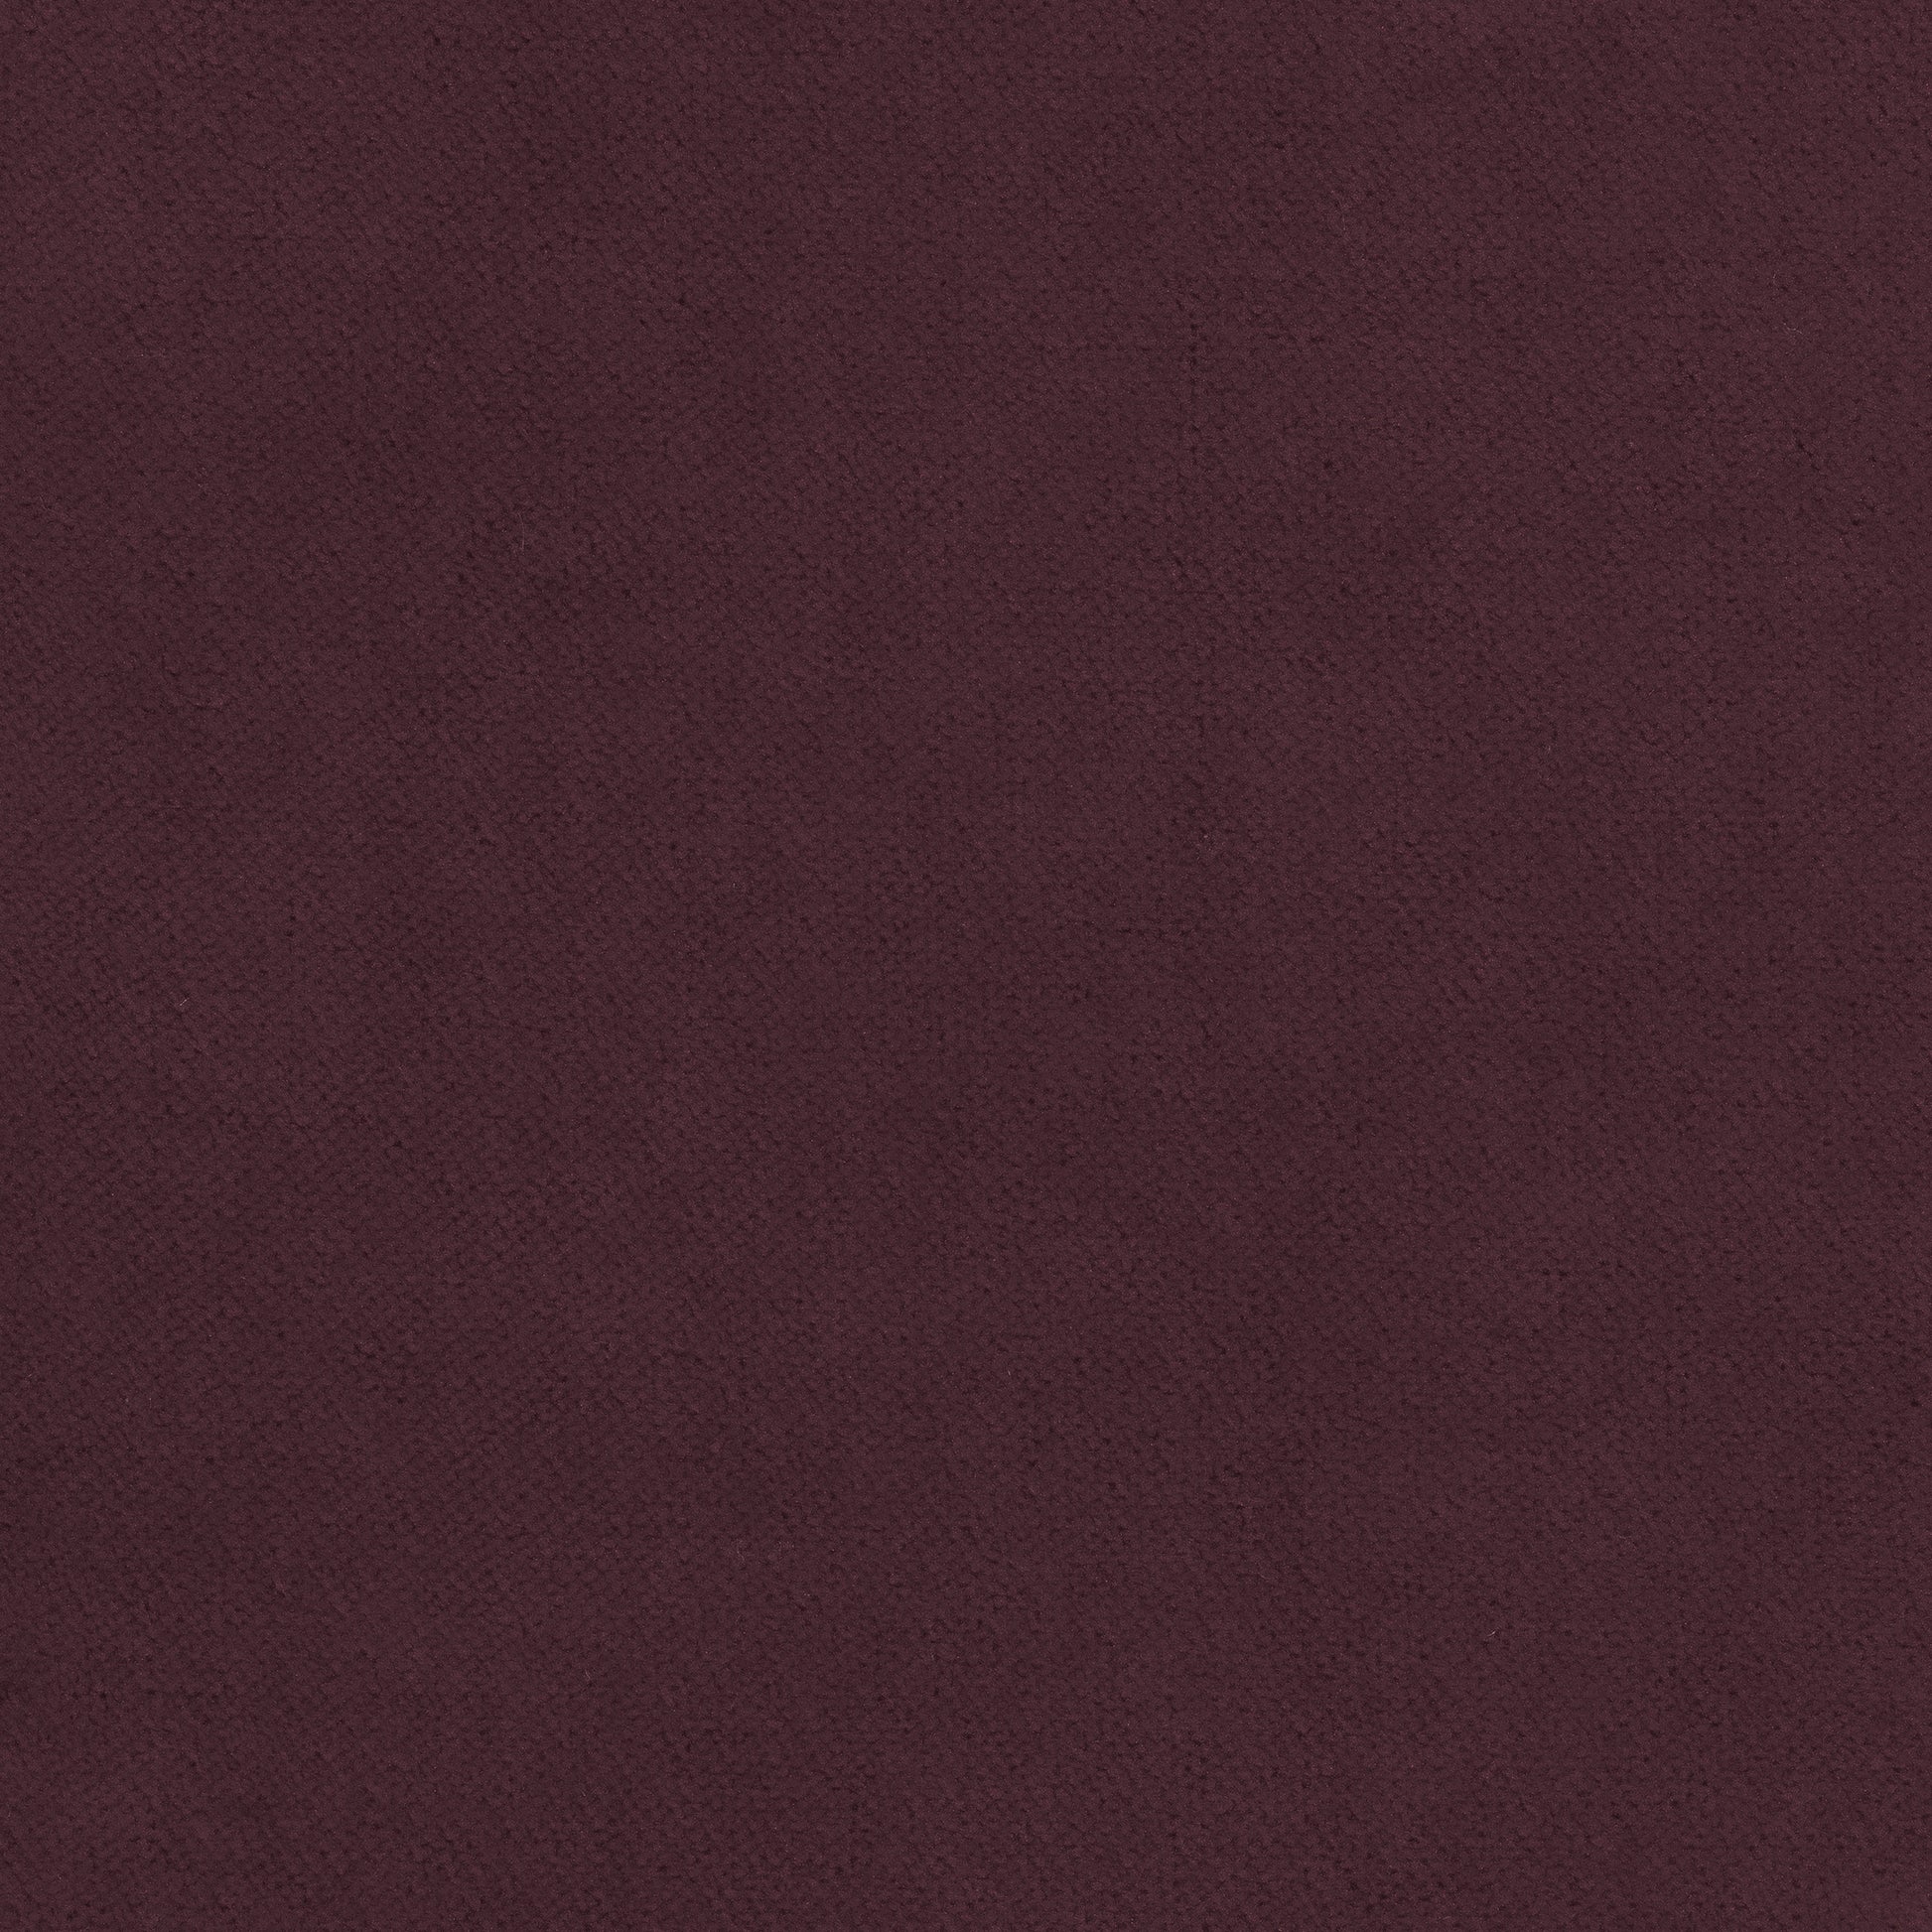 Purchase Thibaut Fabric Pattern# W7211 pattern name Club Velvet color Aubergine